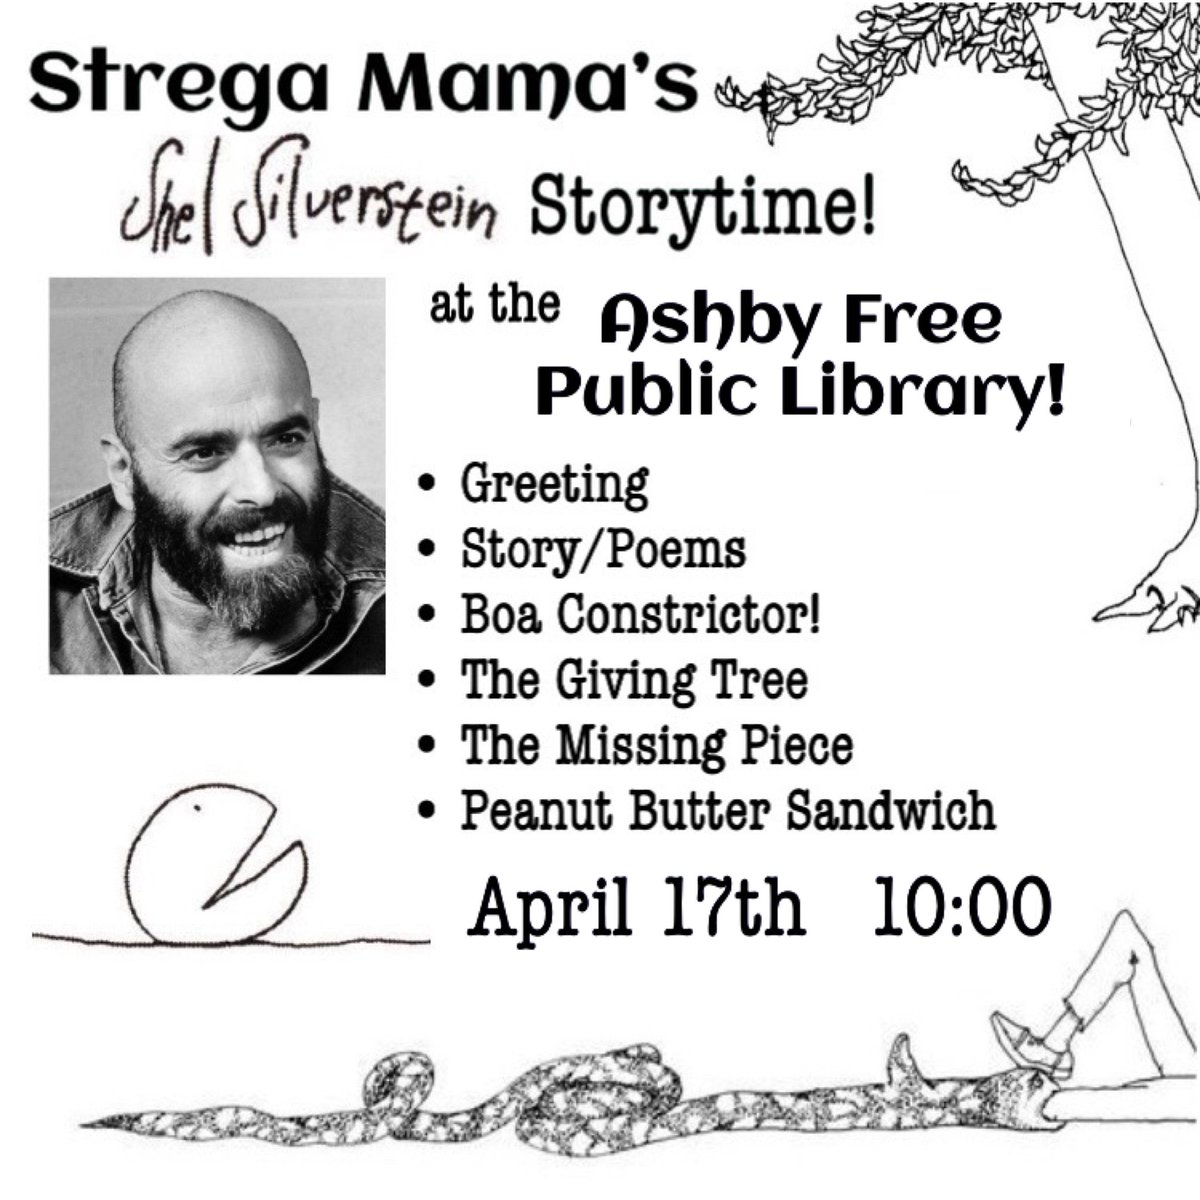 🖤🤍 It’s a Shel Silverstein Storytime at the Ashby Library! Next Wednesday, April 17th at 10:00! Join @Strega_Mama for the fun and discover the incredible magic of Shel’s silly style! 🤍🖤 

#Strega_Mama #shelsilverstein #themissingpiece #thegivingtree #boaconstrictor